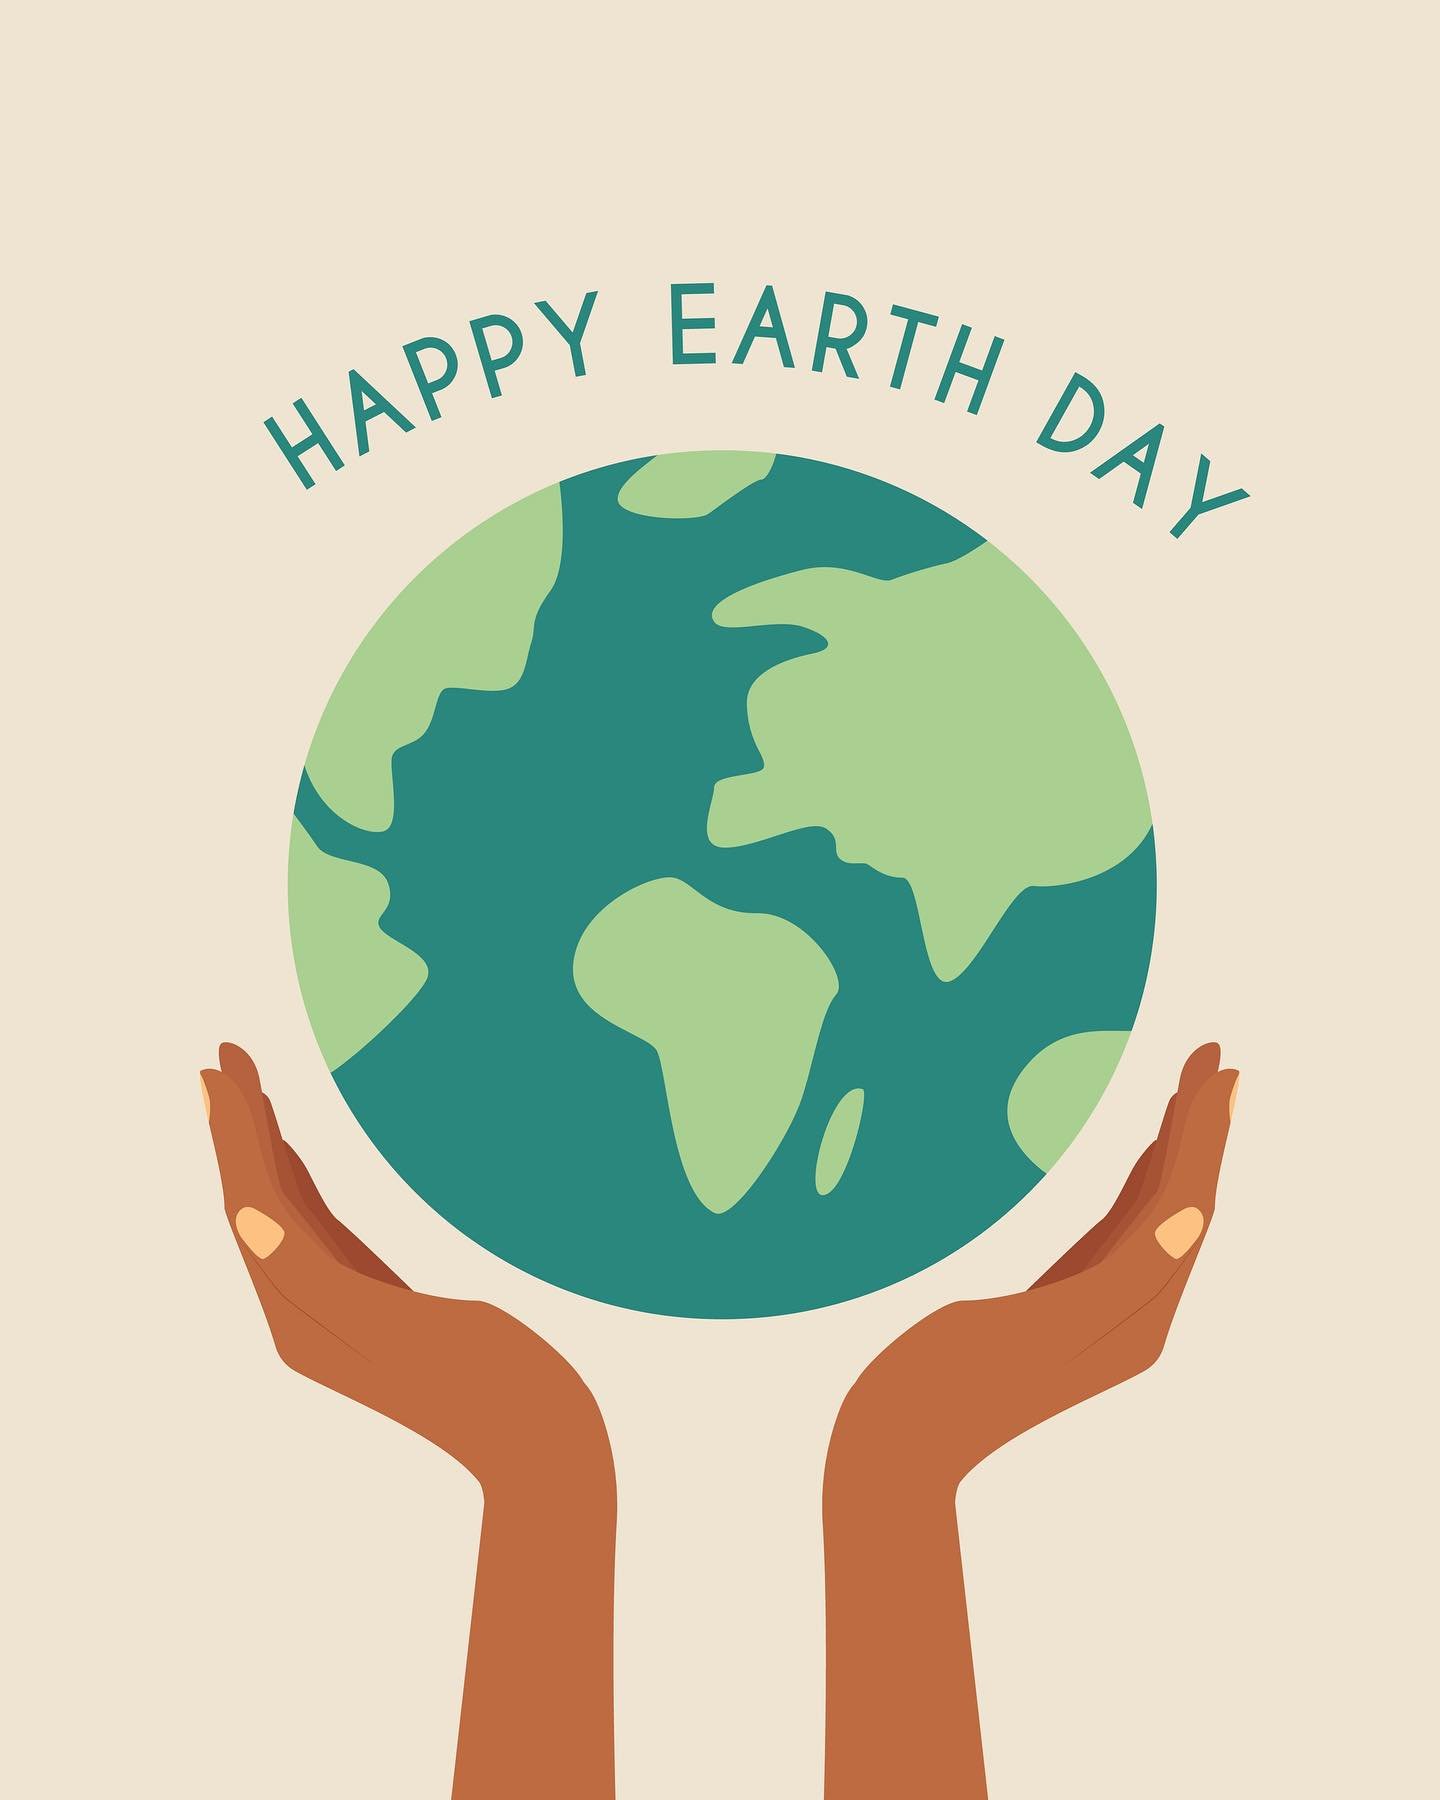 HAPPY EARTH DAY&hellip; @reveriepage 

#earthday #happyearthday #happyearthday🌎 #circularity #sustainableliving #sustainablelifestyle #protectourplanet #protectouroceans #jonimitchell #earthconscious #earth #peopleandplanet #sustainabledevelopmentgo